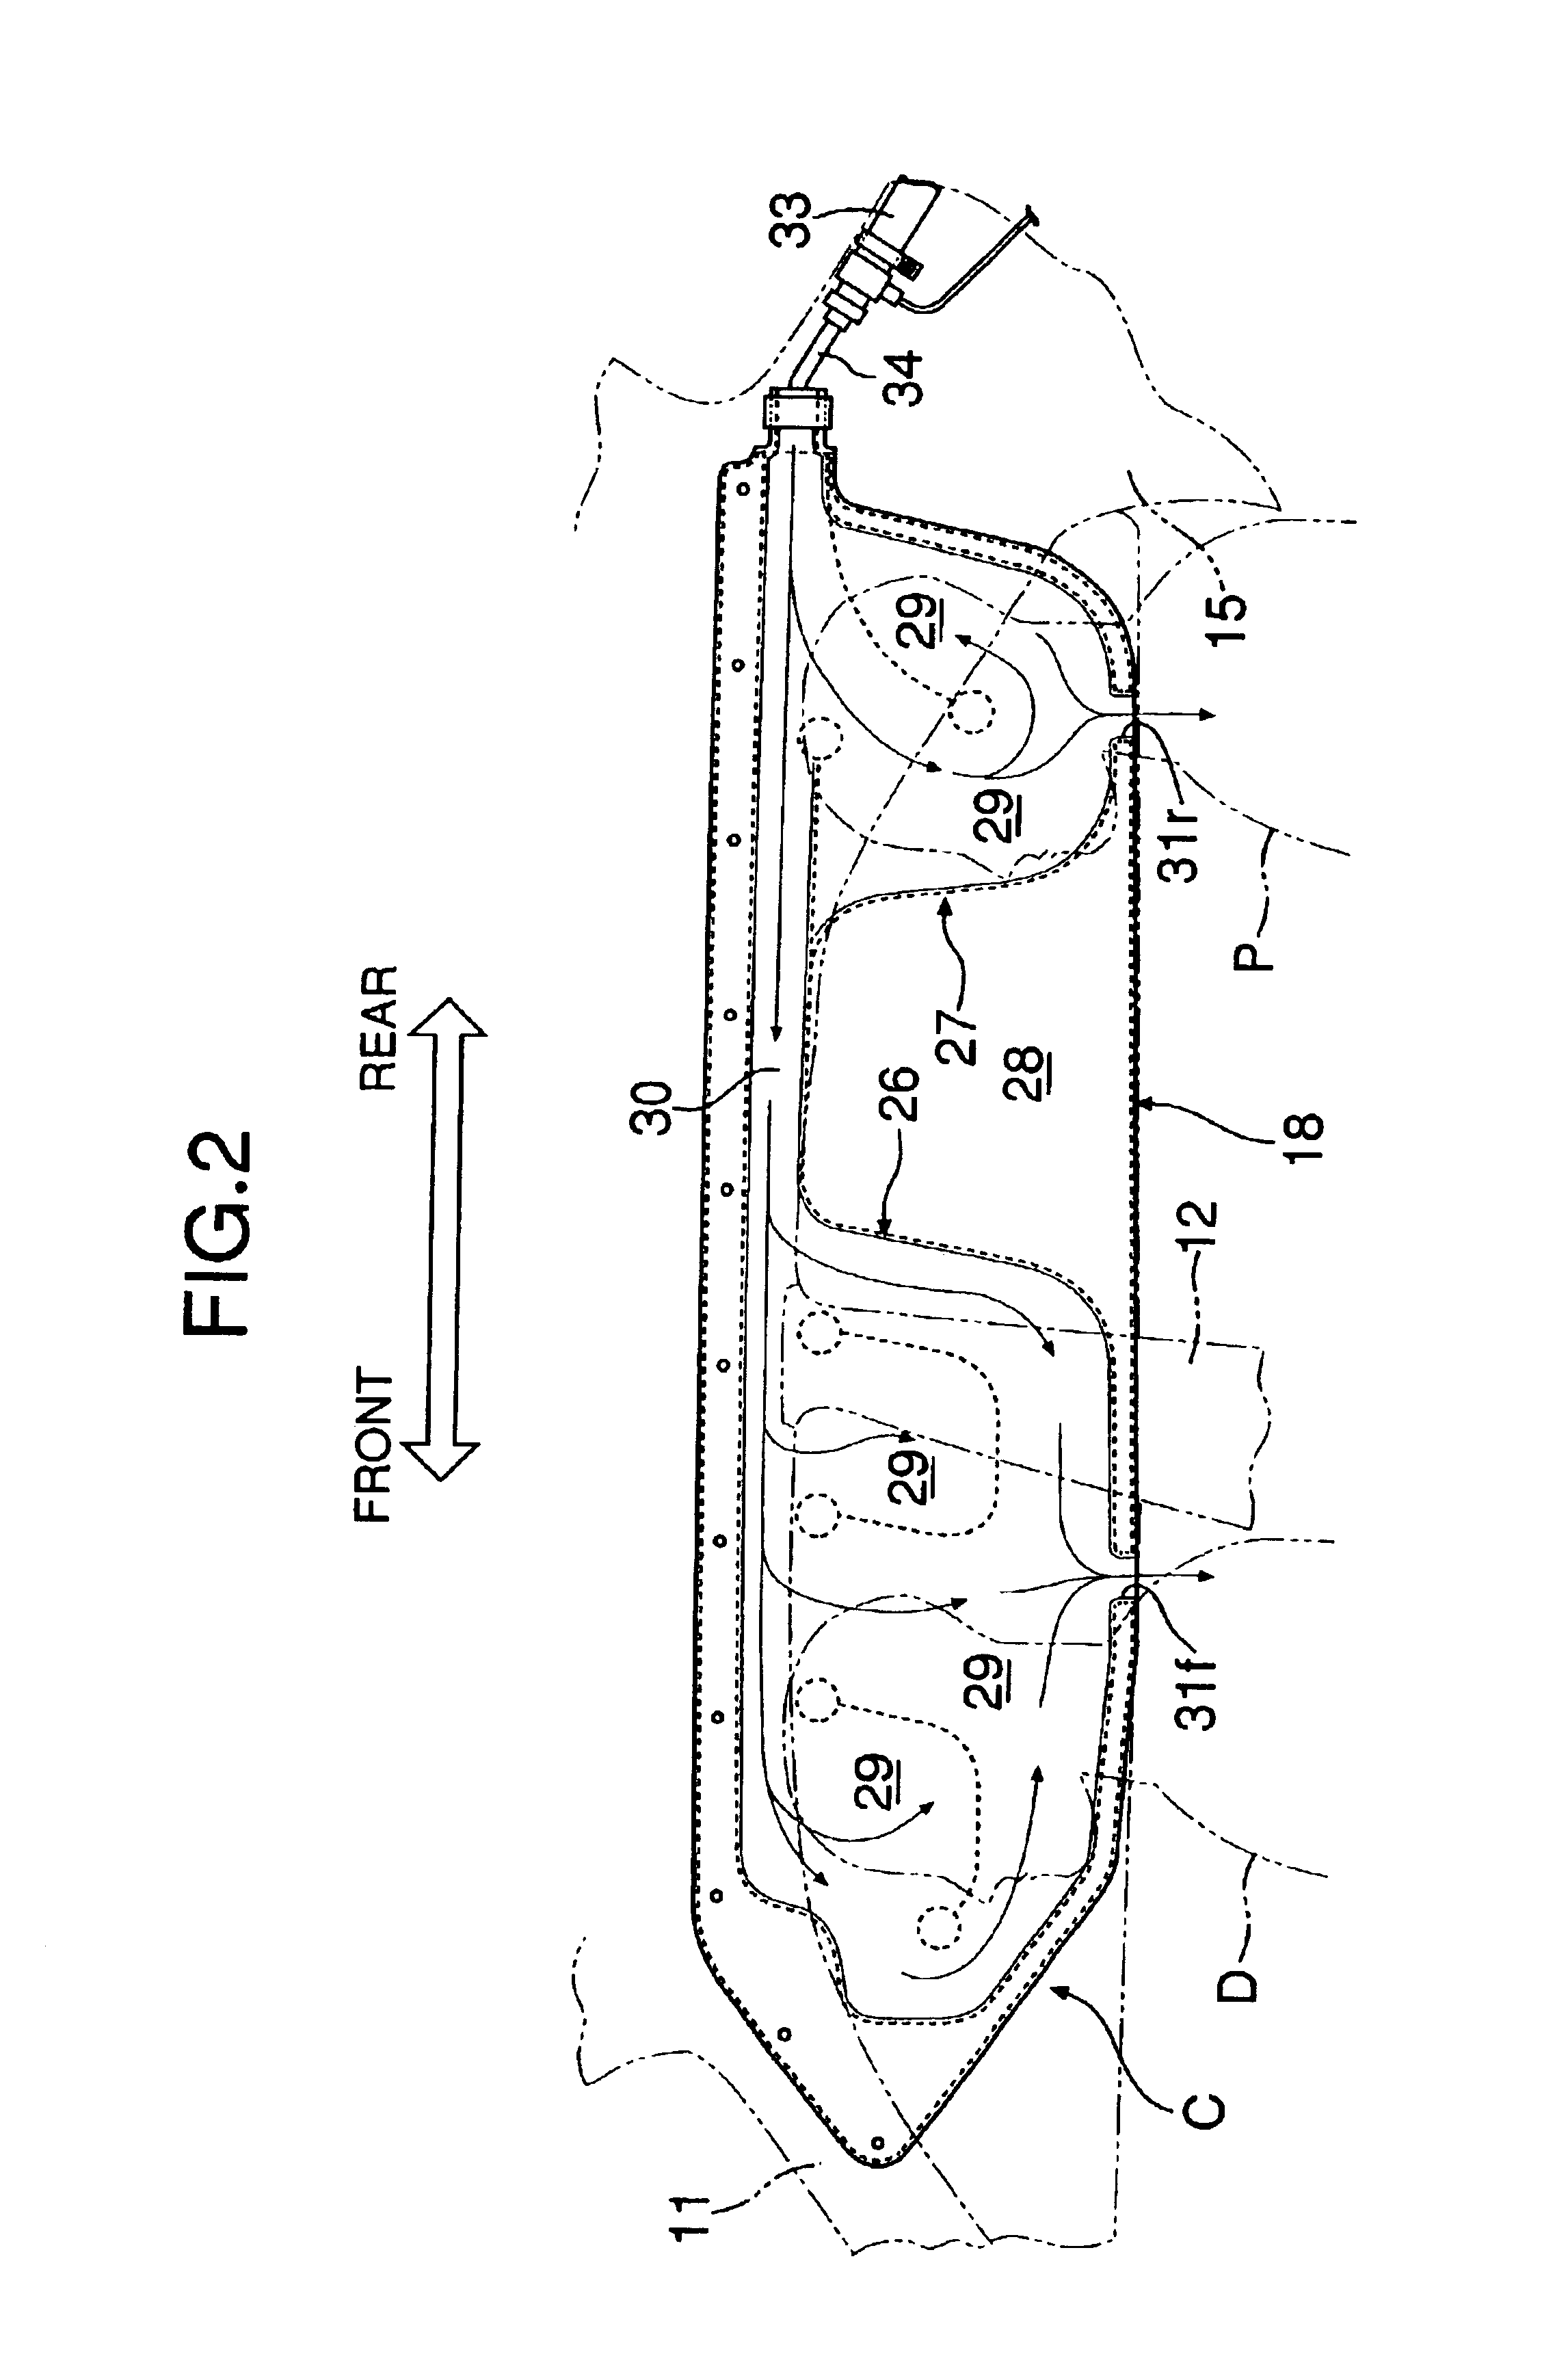 Occupant restraint system including side airbag with vent hole